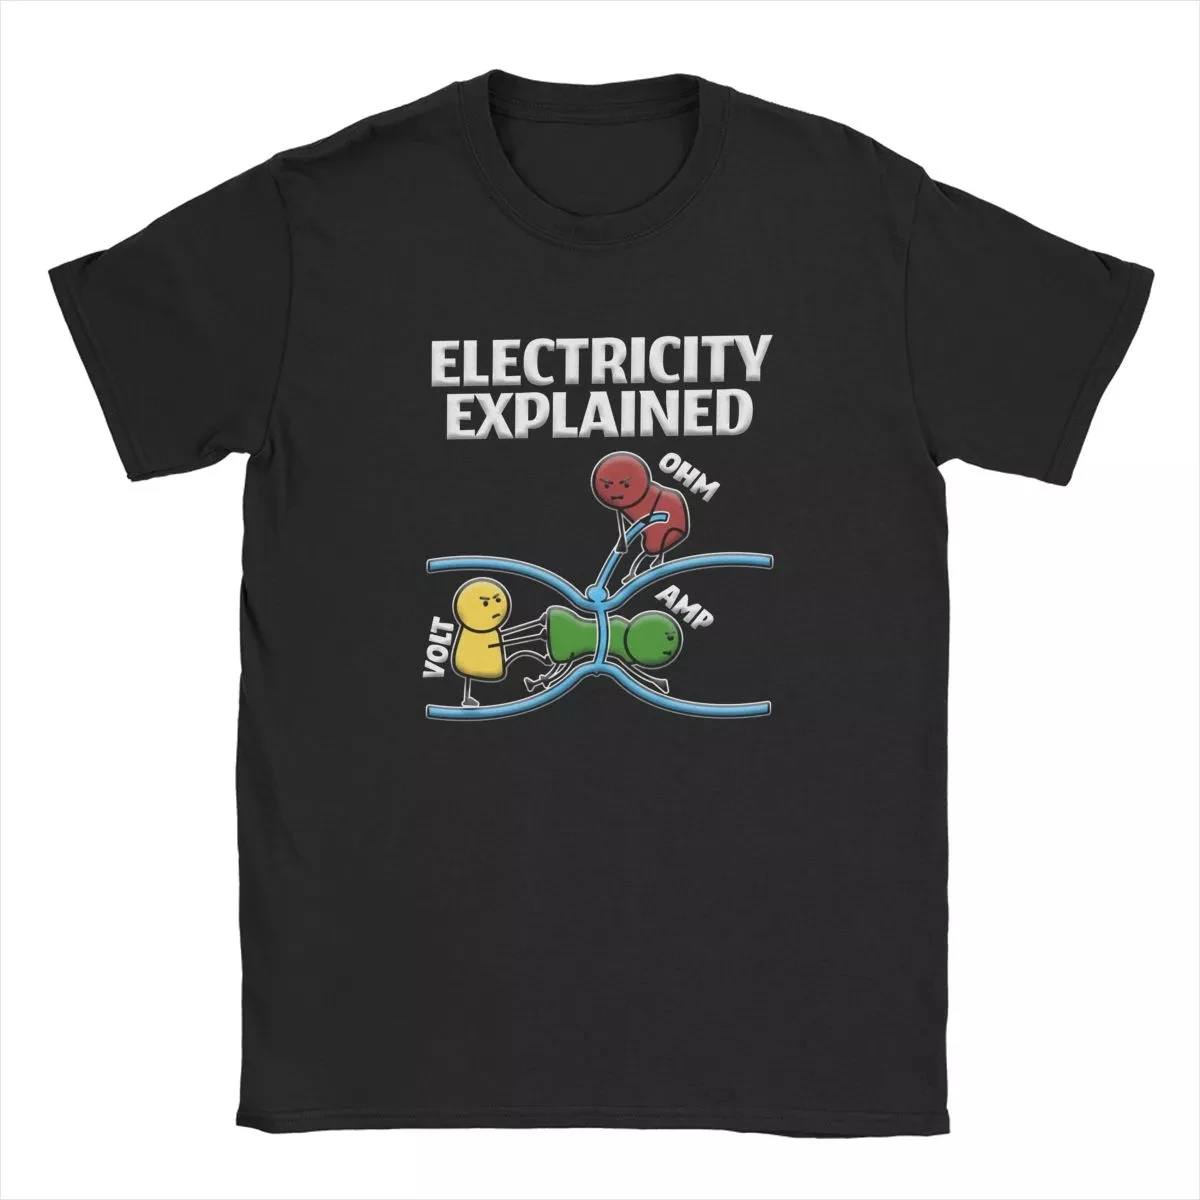 

Men's Funny Electrician Electricity Explained T Shirts Ohm's Law Pure Cotton Clothing Novelty Short Sleeve Tees Printed T-Shirt